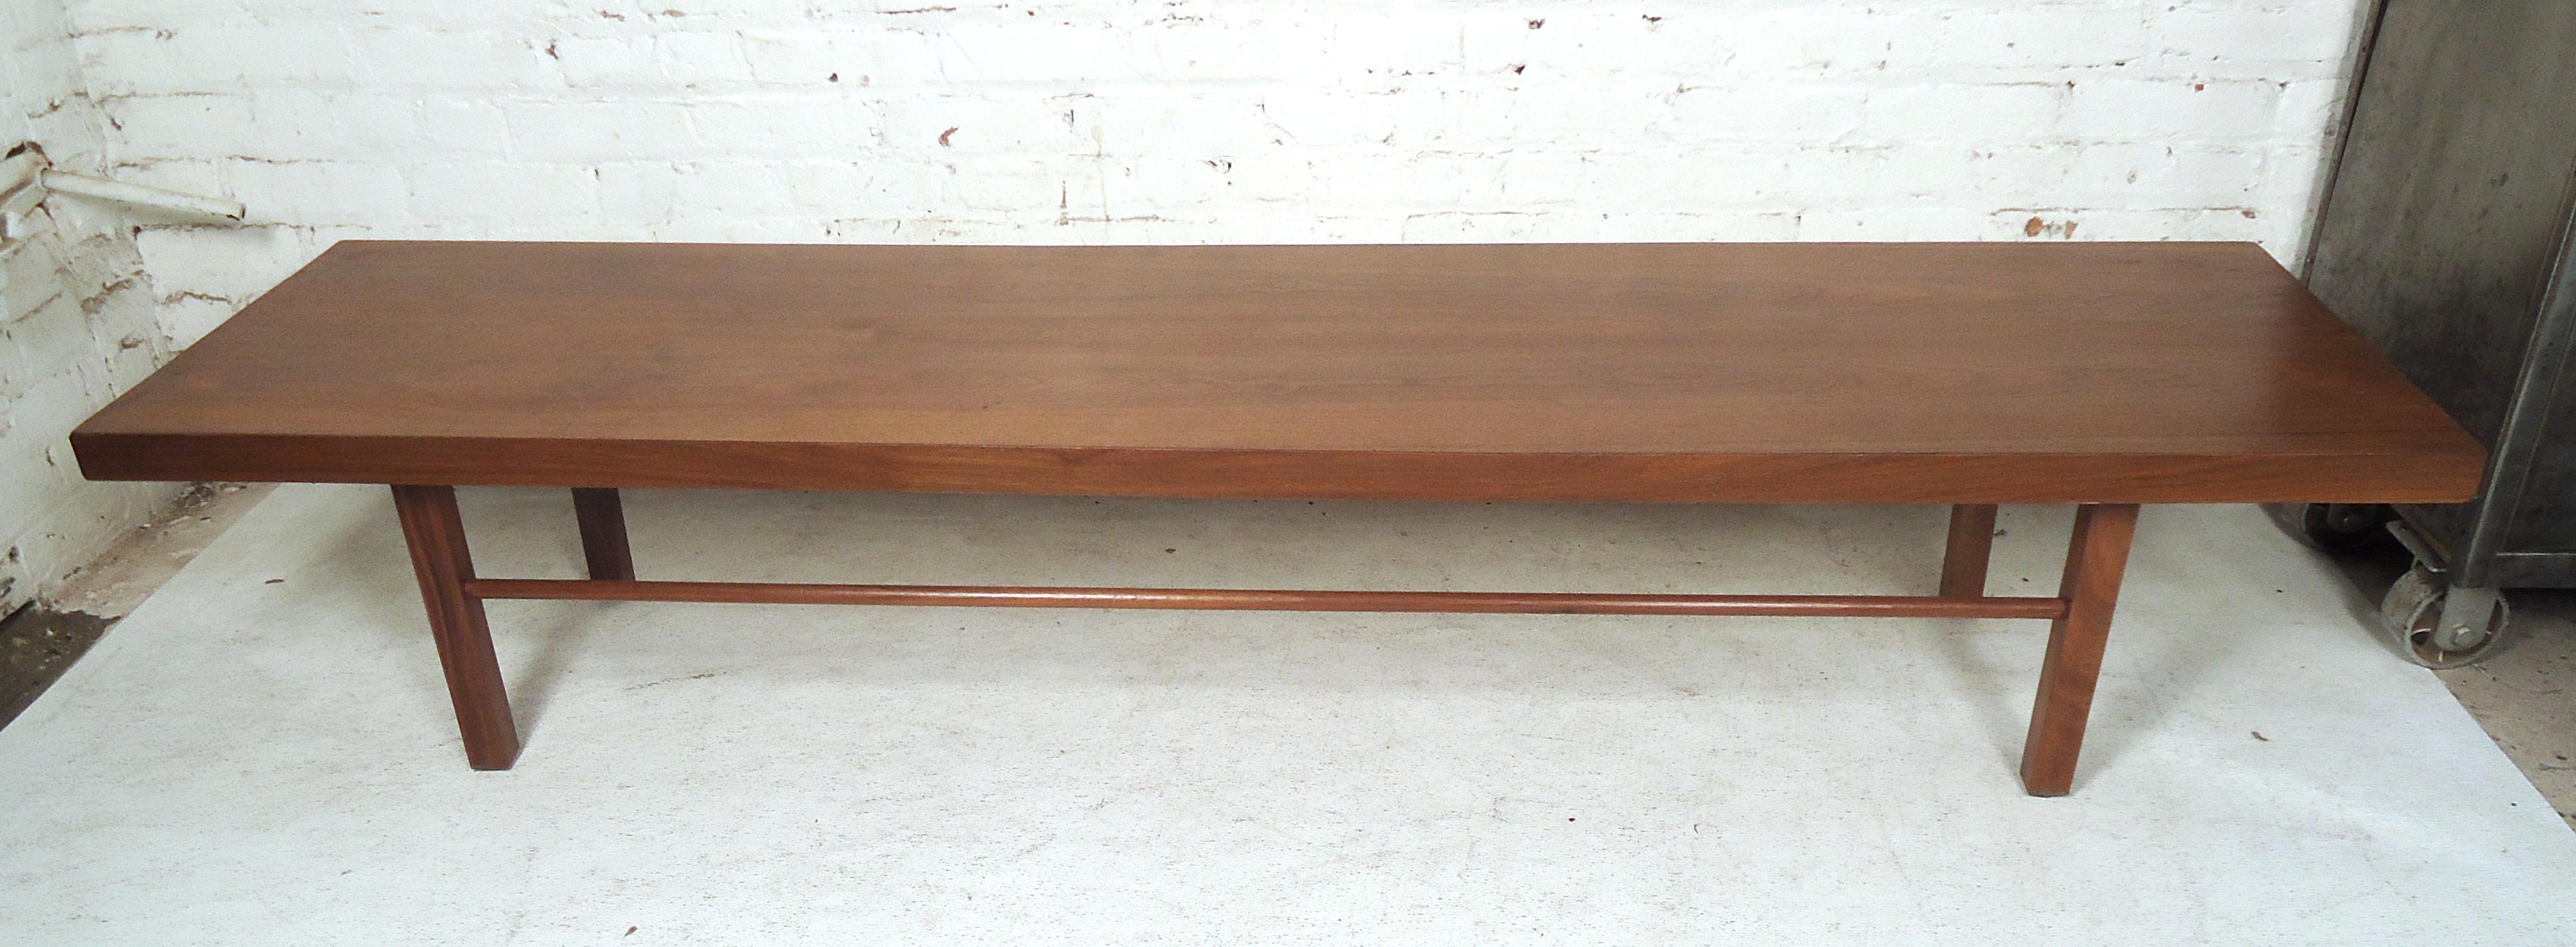 Gorgeous Mid-Century Modern coffee table featuring rich walnut grain on a set of sturdy legs.

(Please confirm item location - NY or NJ - with dealer).